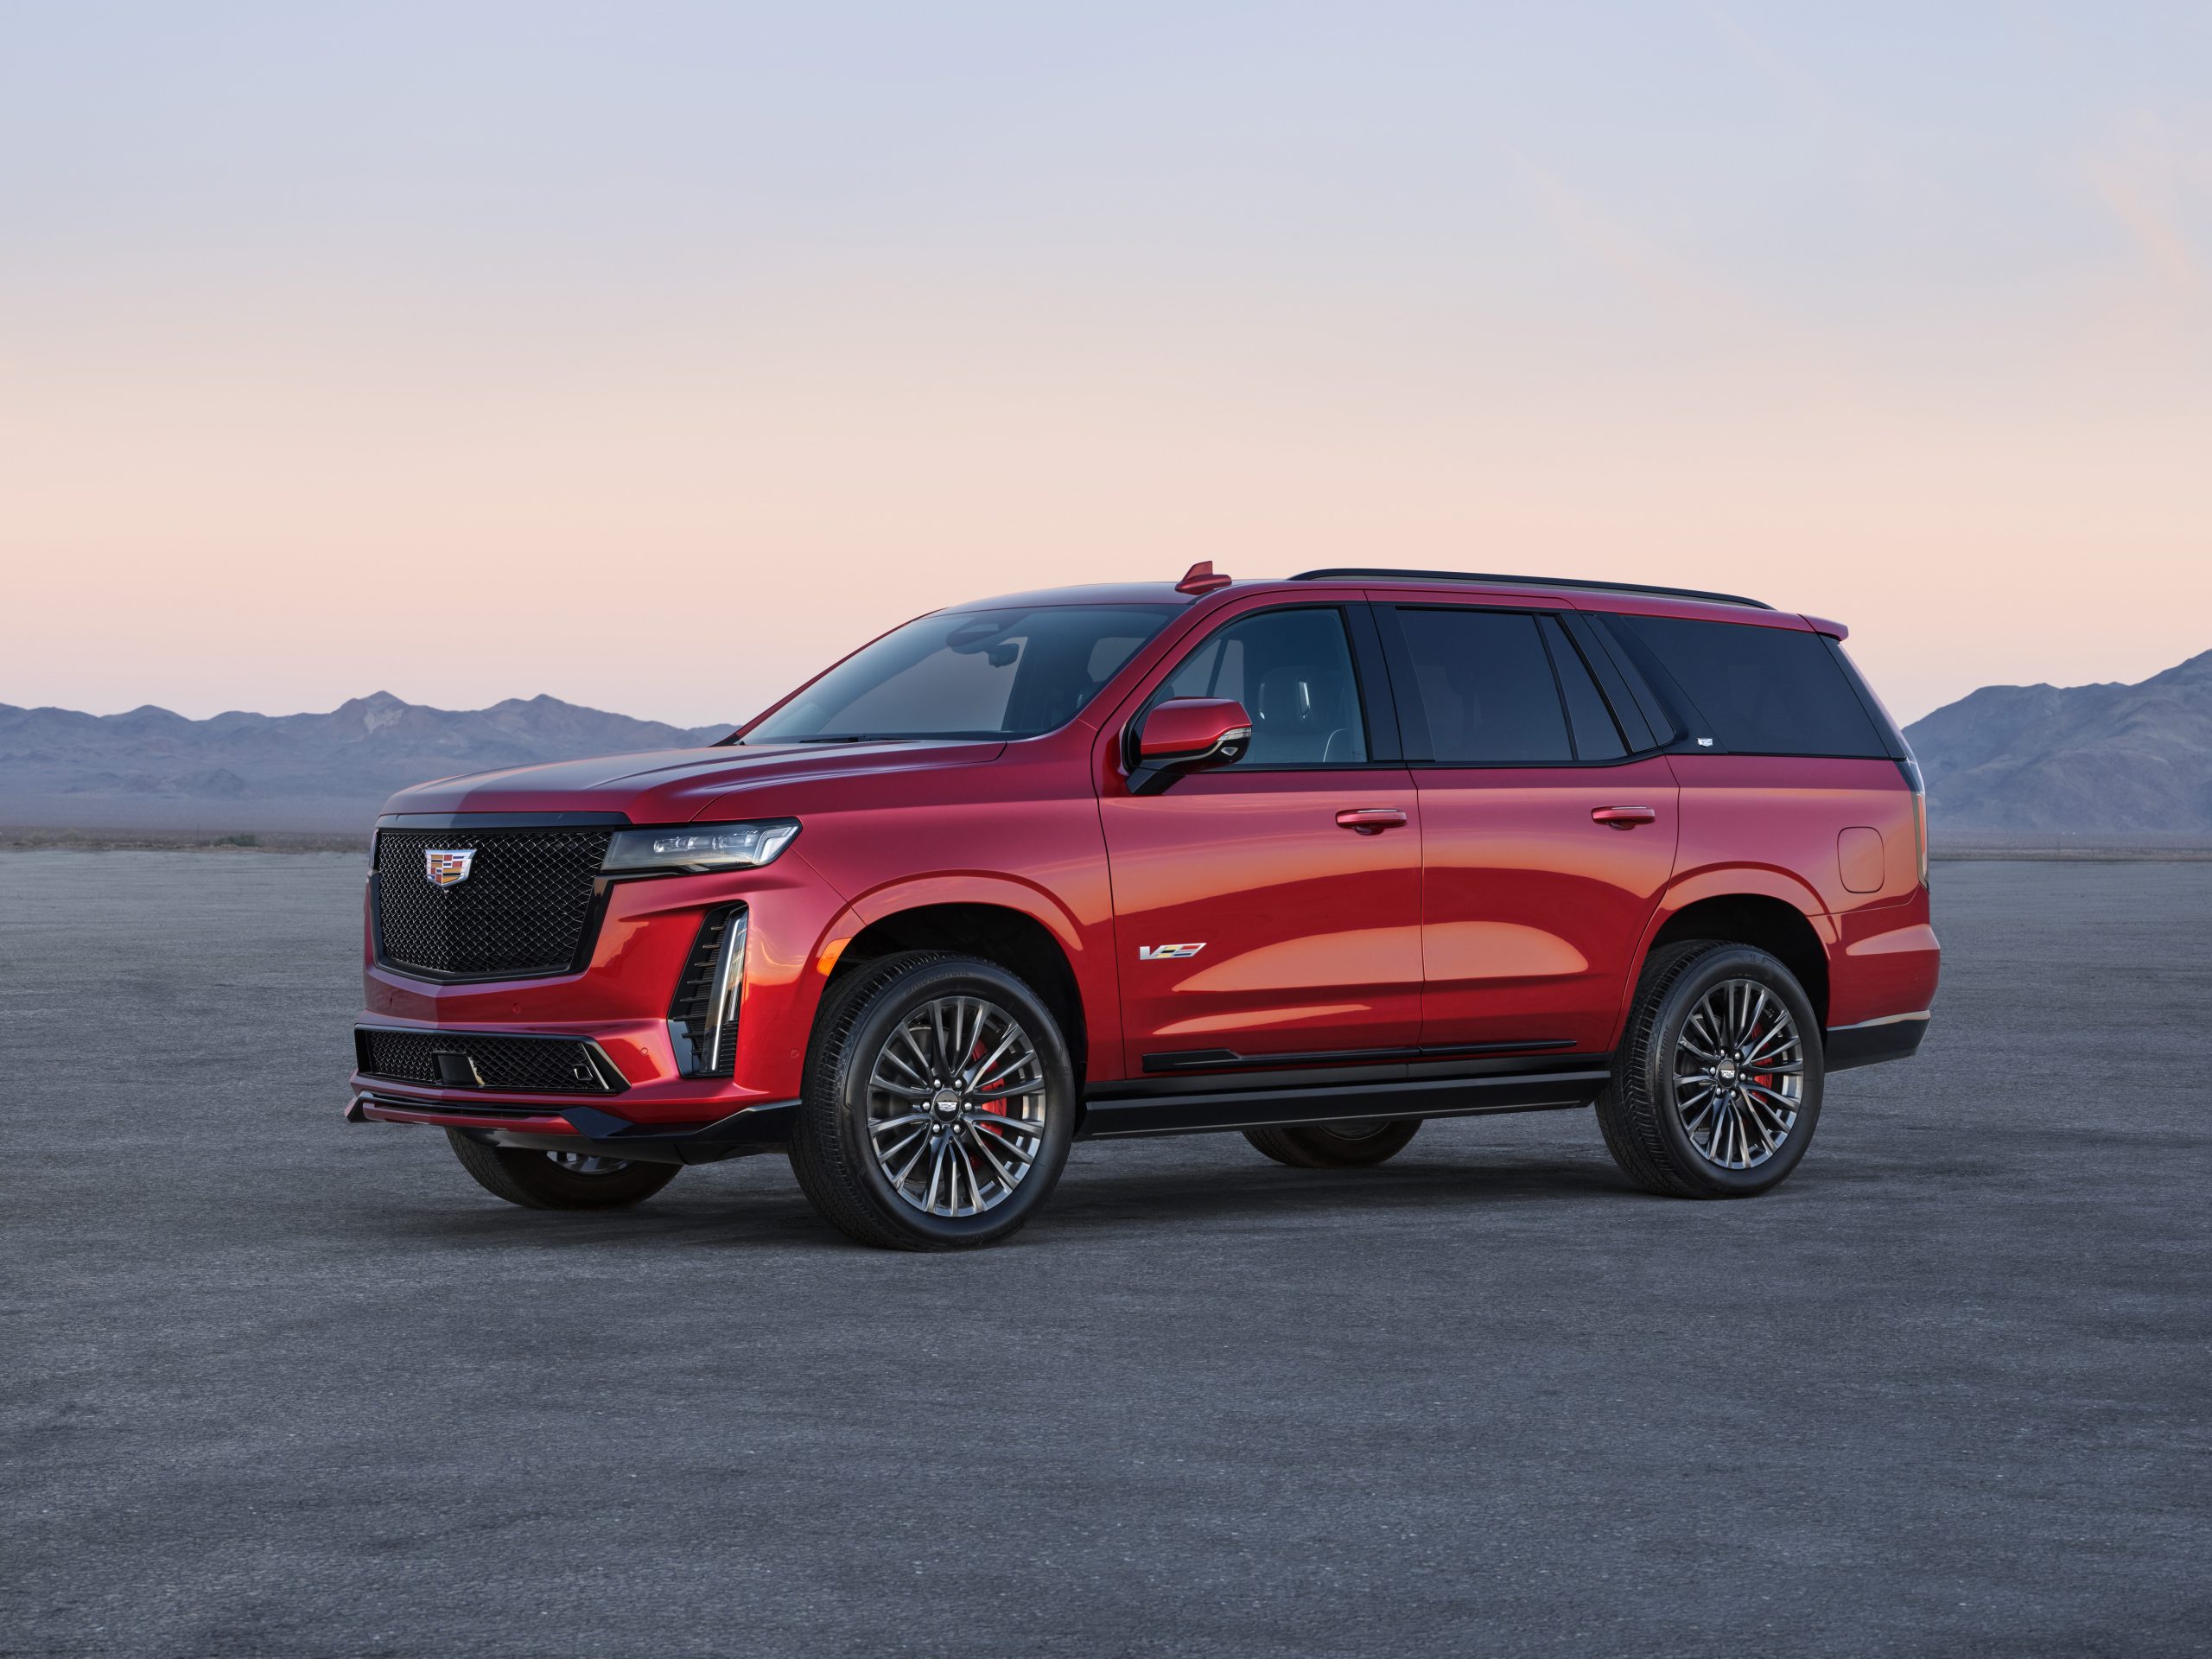 A 3/4 profile view of a red pre-production 2023 Cadillac Escalade V-Series SUV parked with mountains in the background.